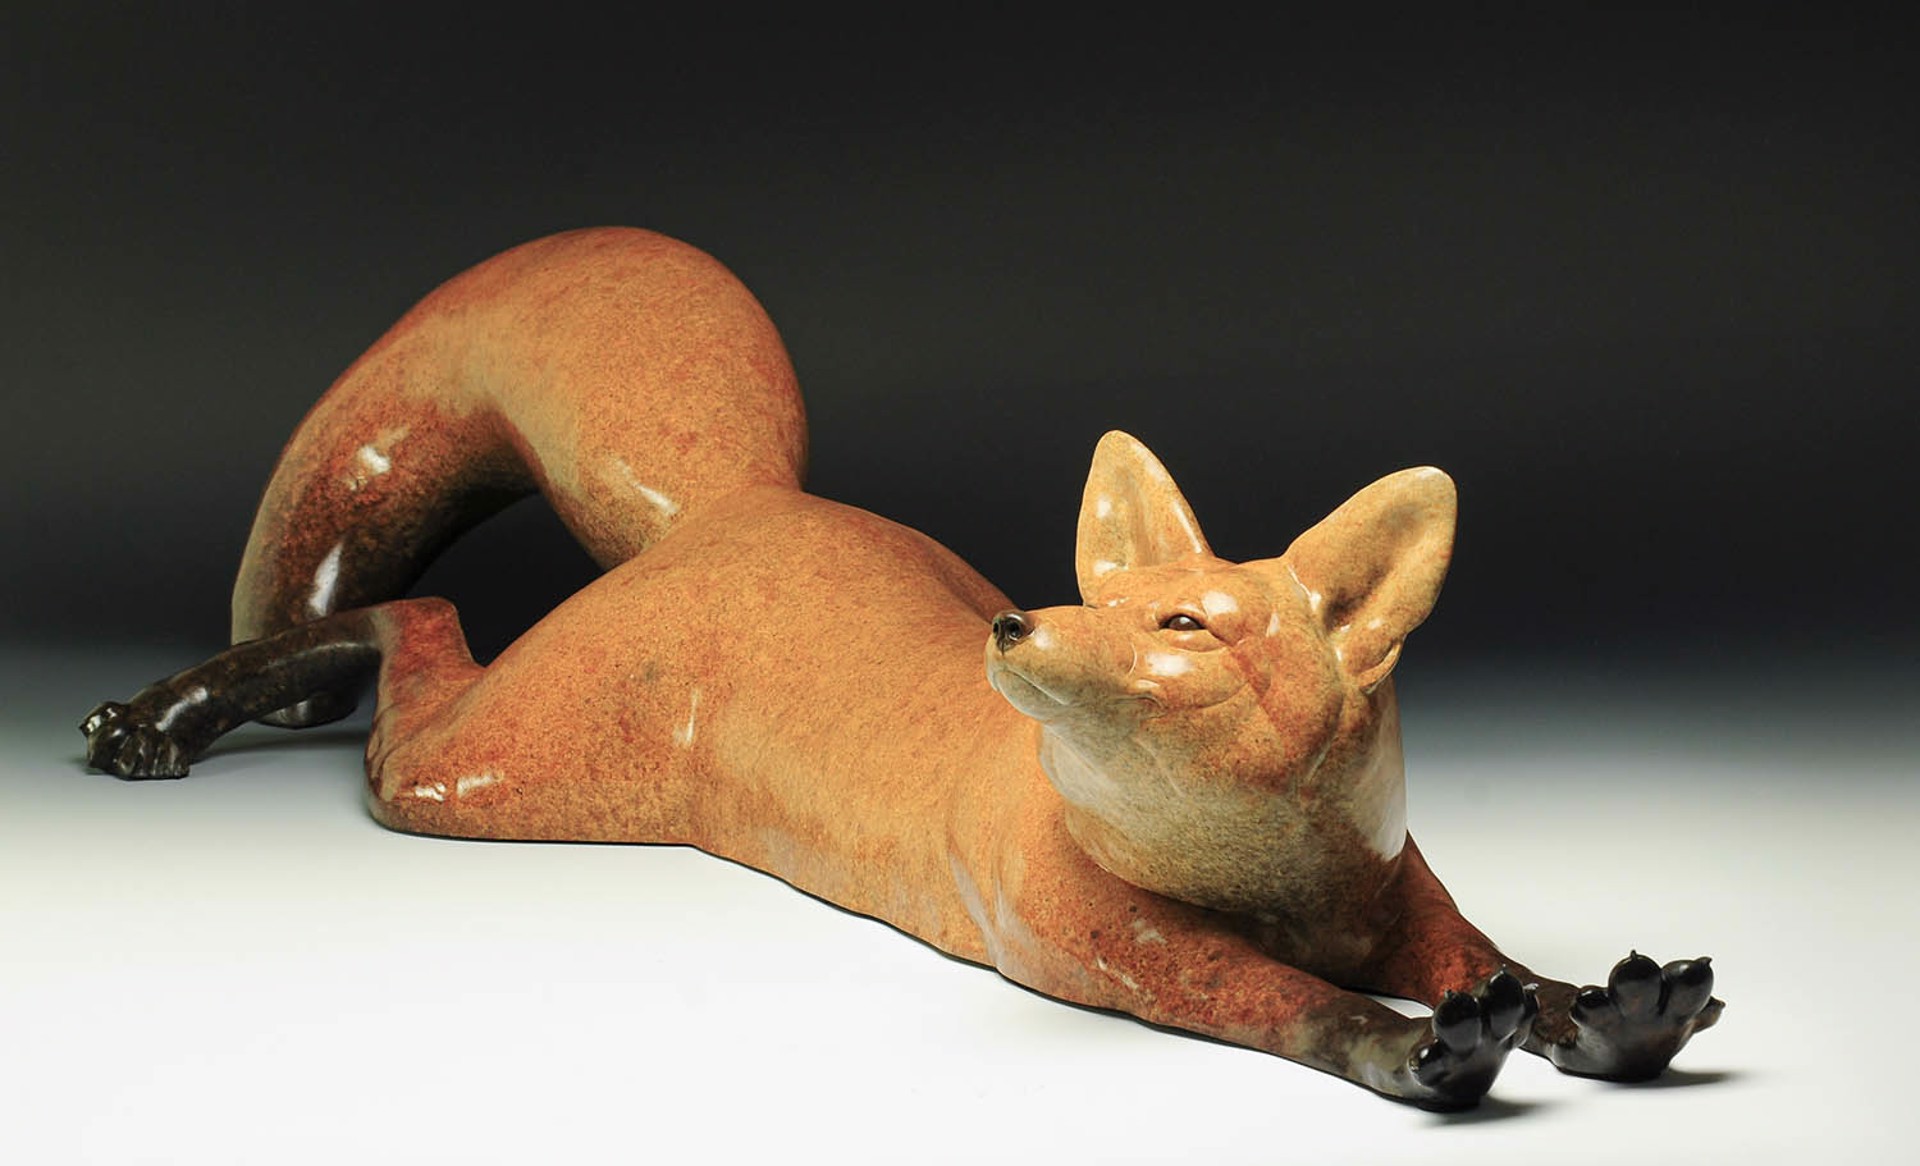 A Bronze Sculpture Of A Red Fox Stretched Out On Its Belly Featuring A Smooth Surface With A Contemporary Patina, By Jeremy Bradshaw, Available At Gallery Wild